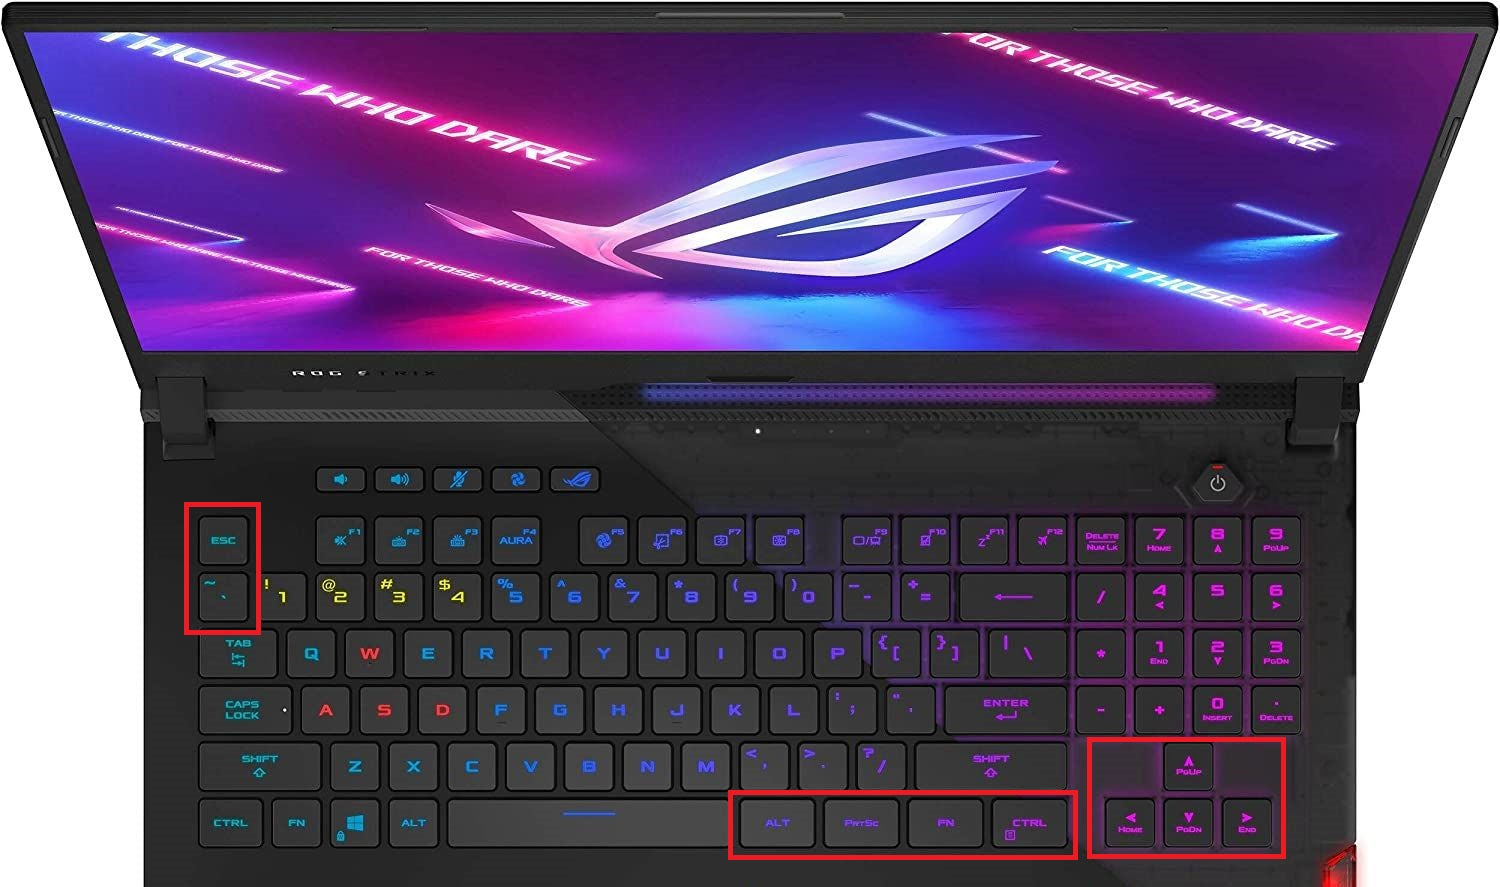 TPU Keyboard Skin Cover for ASUS ROG Strix SCAR 17 (2021) 17.3-inch G733 Notebook Laptop (Clear)